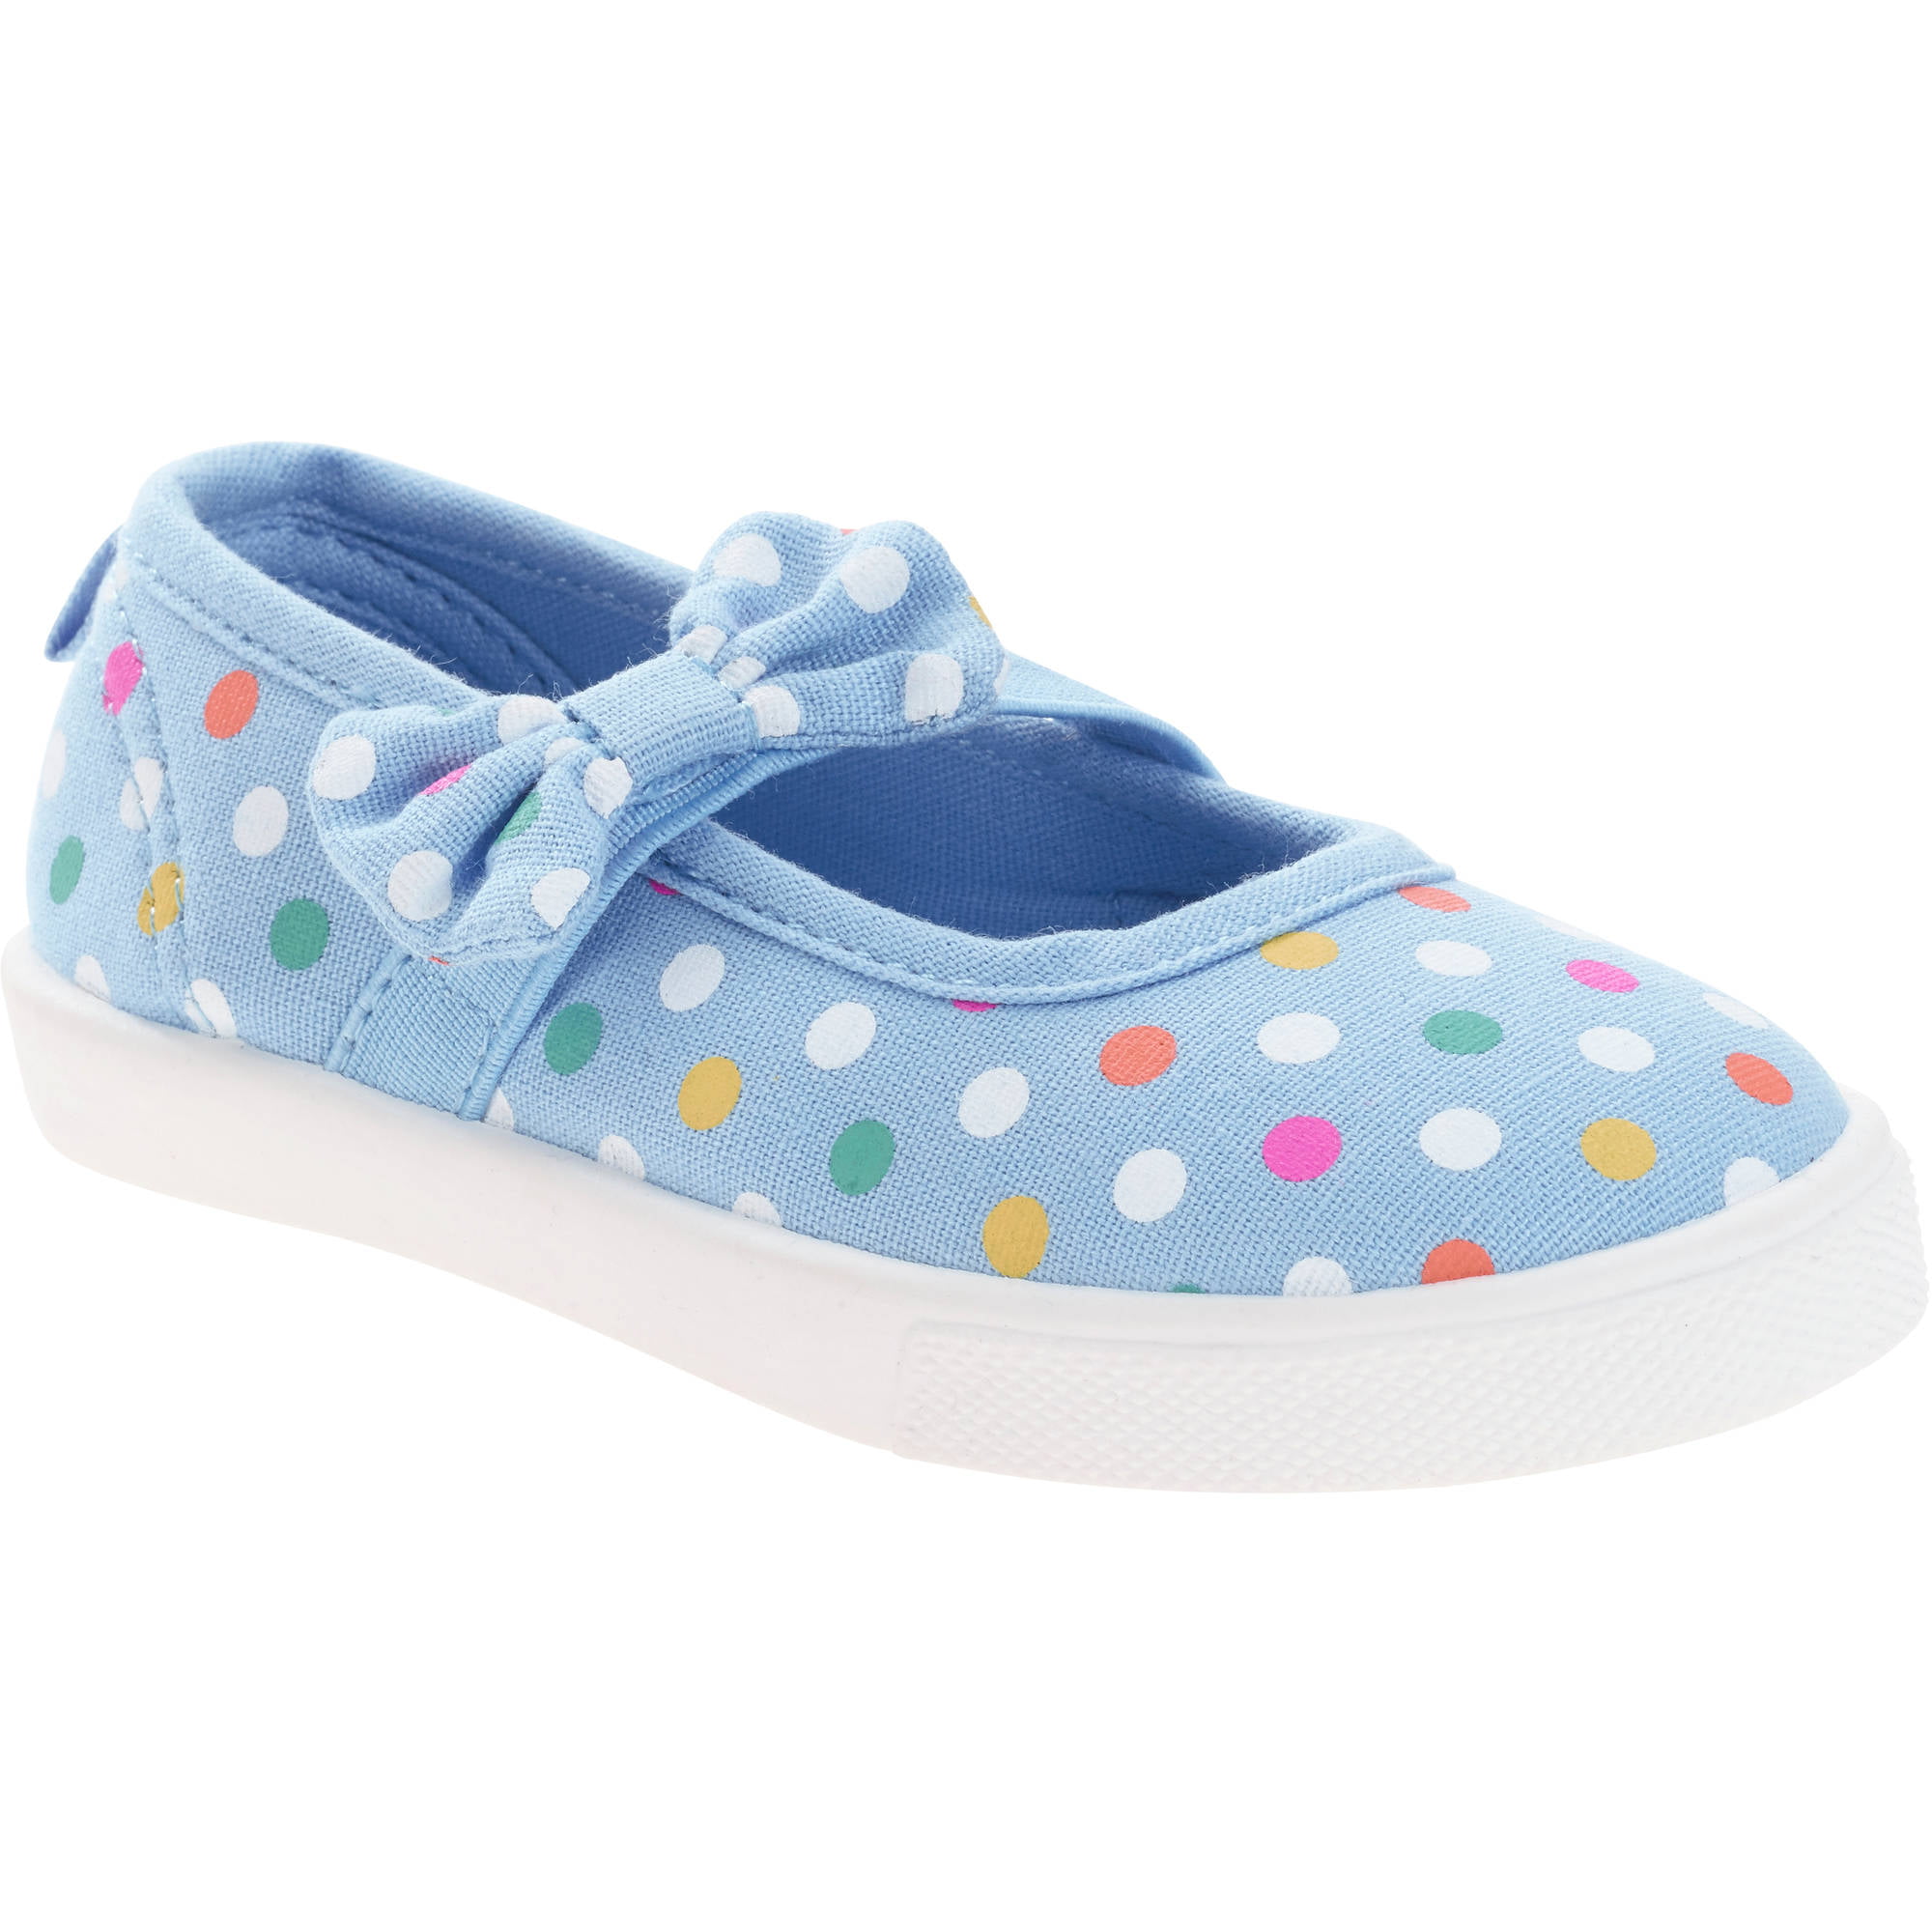 Faded Glory Toddler Girls Blue Dot Mary Jane Shoes With Bow Size 8 NEW 